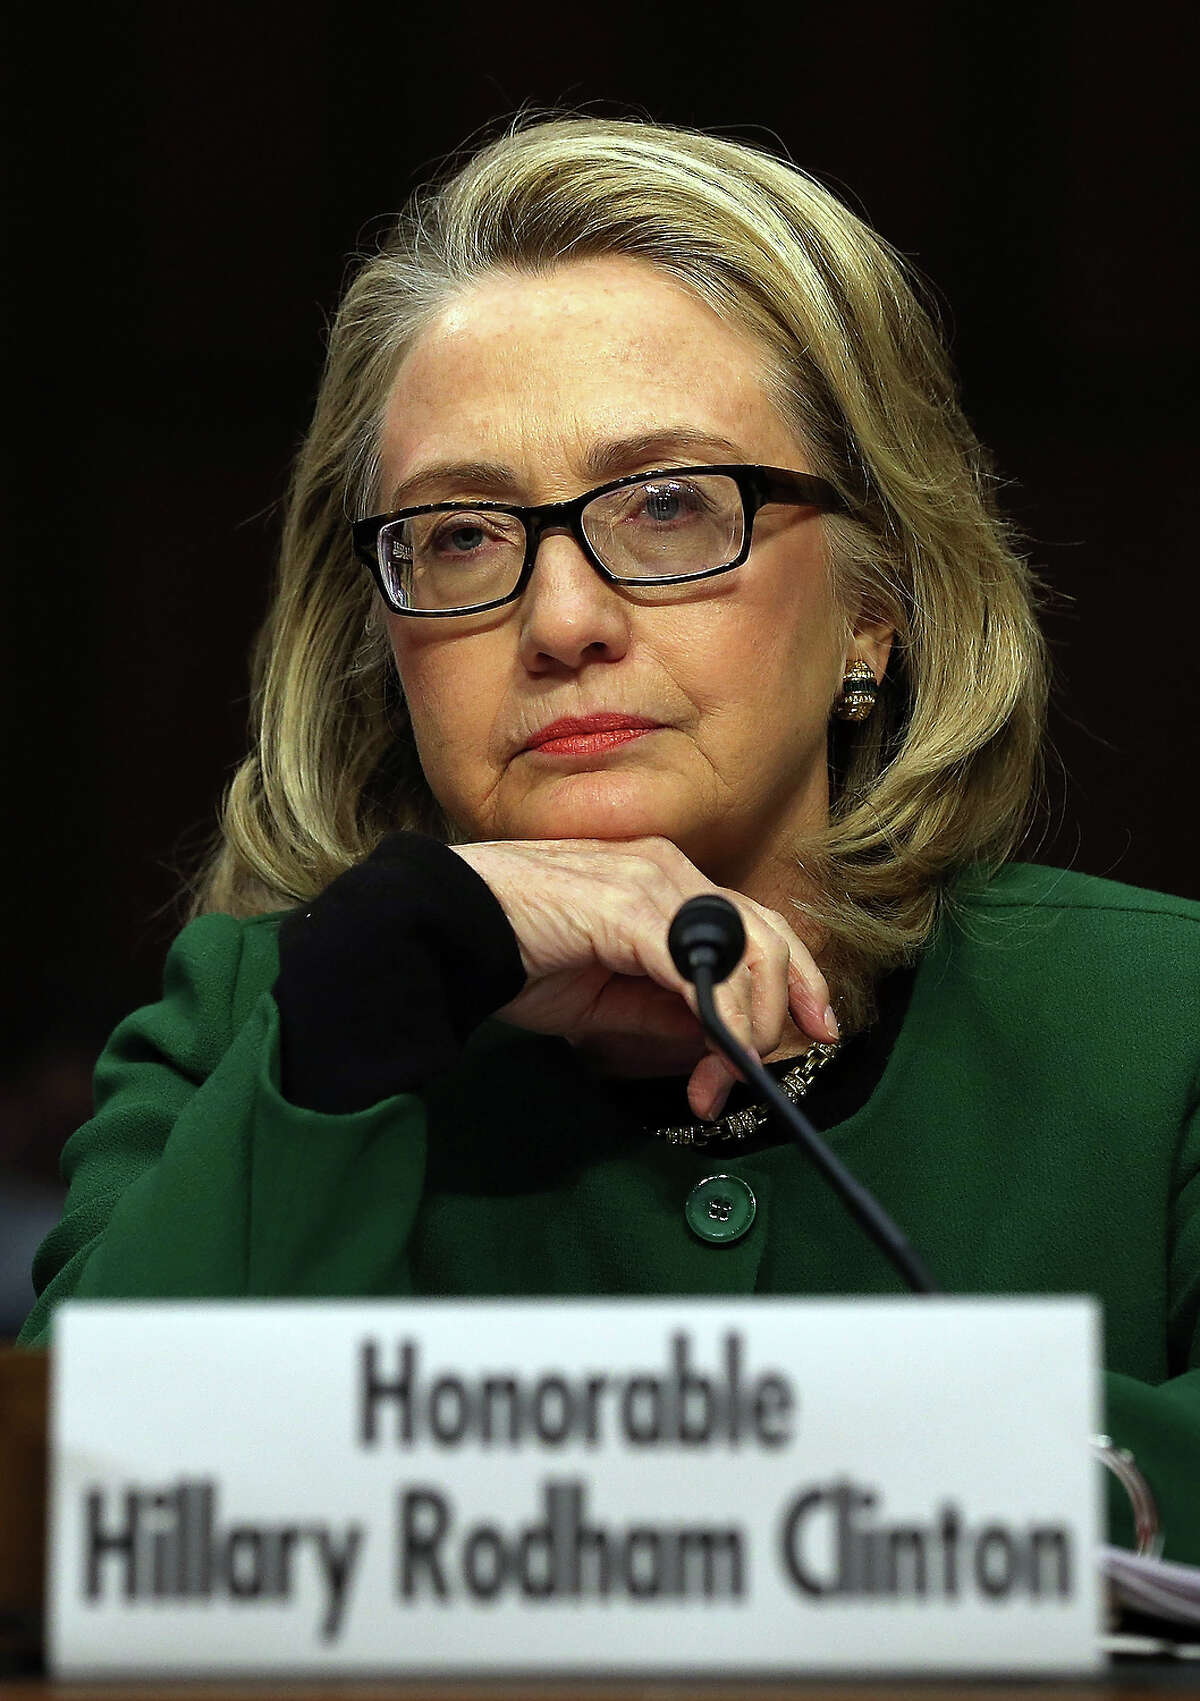 Sec. of State Hillary Clinton, speaking to Senate Foreign Relations Committee on the Benghazi attacks:  "We had four dead Americans.  Whether it was attack preplanned by terrorists or it was because of a guy out for a walk one night who decided they'd go kill Americans . . . What difference does it make?"